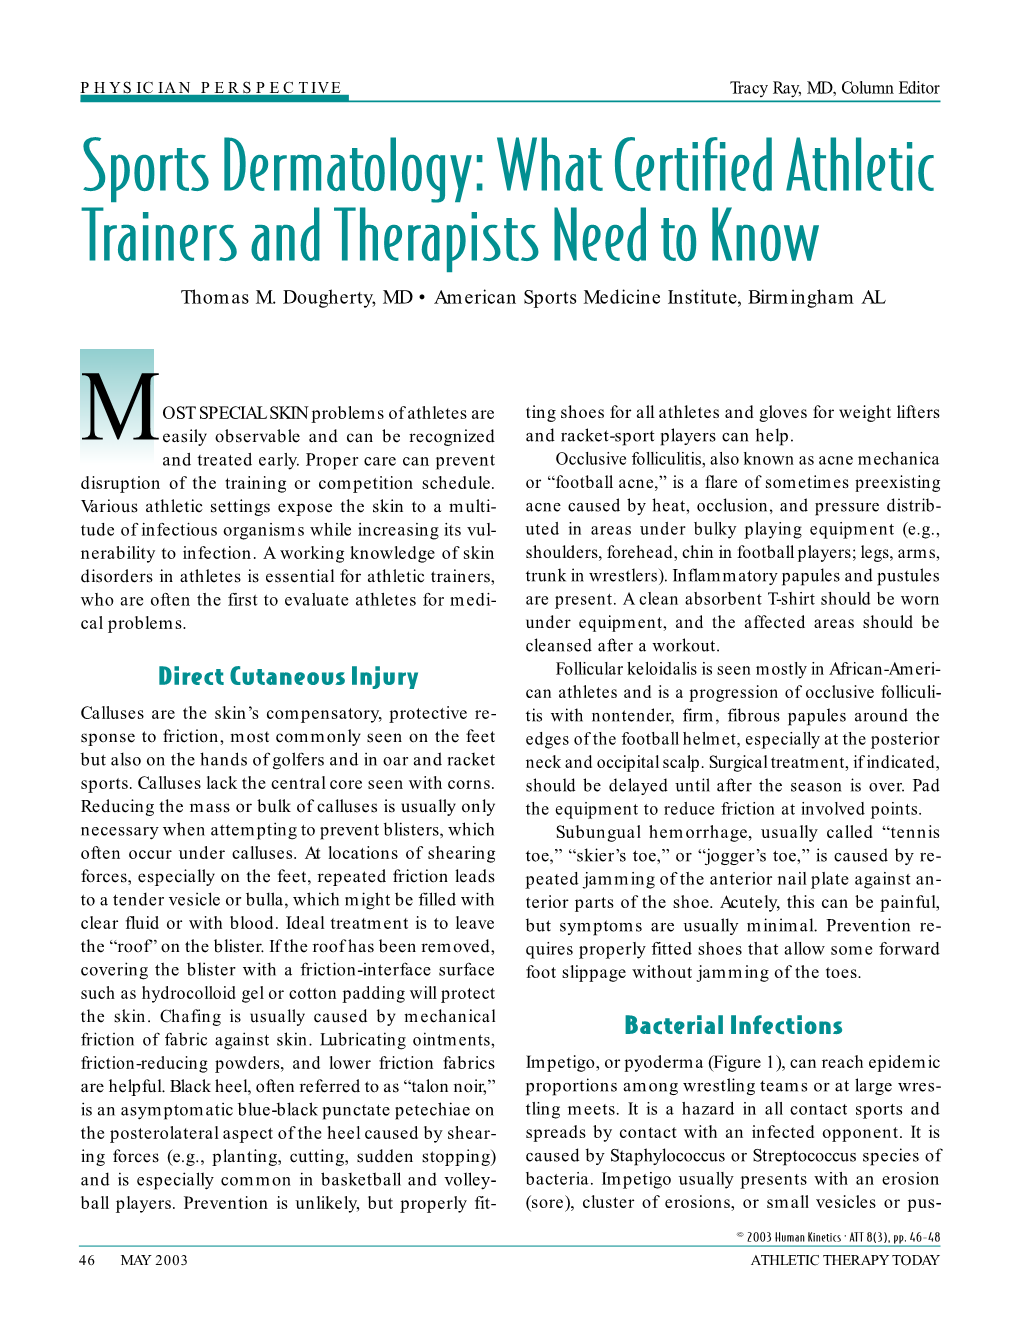 What Certified Athletic Trainers and Therapists Need to Know Thomas M